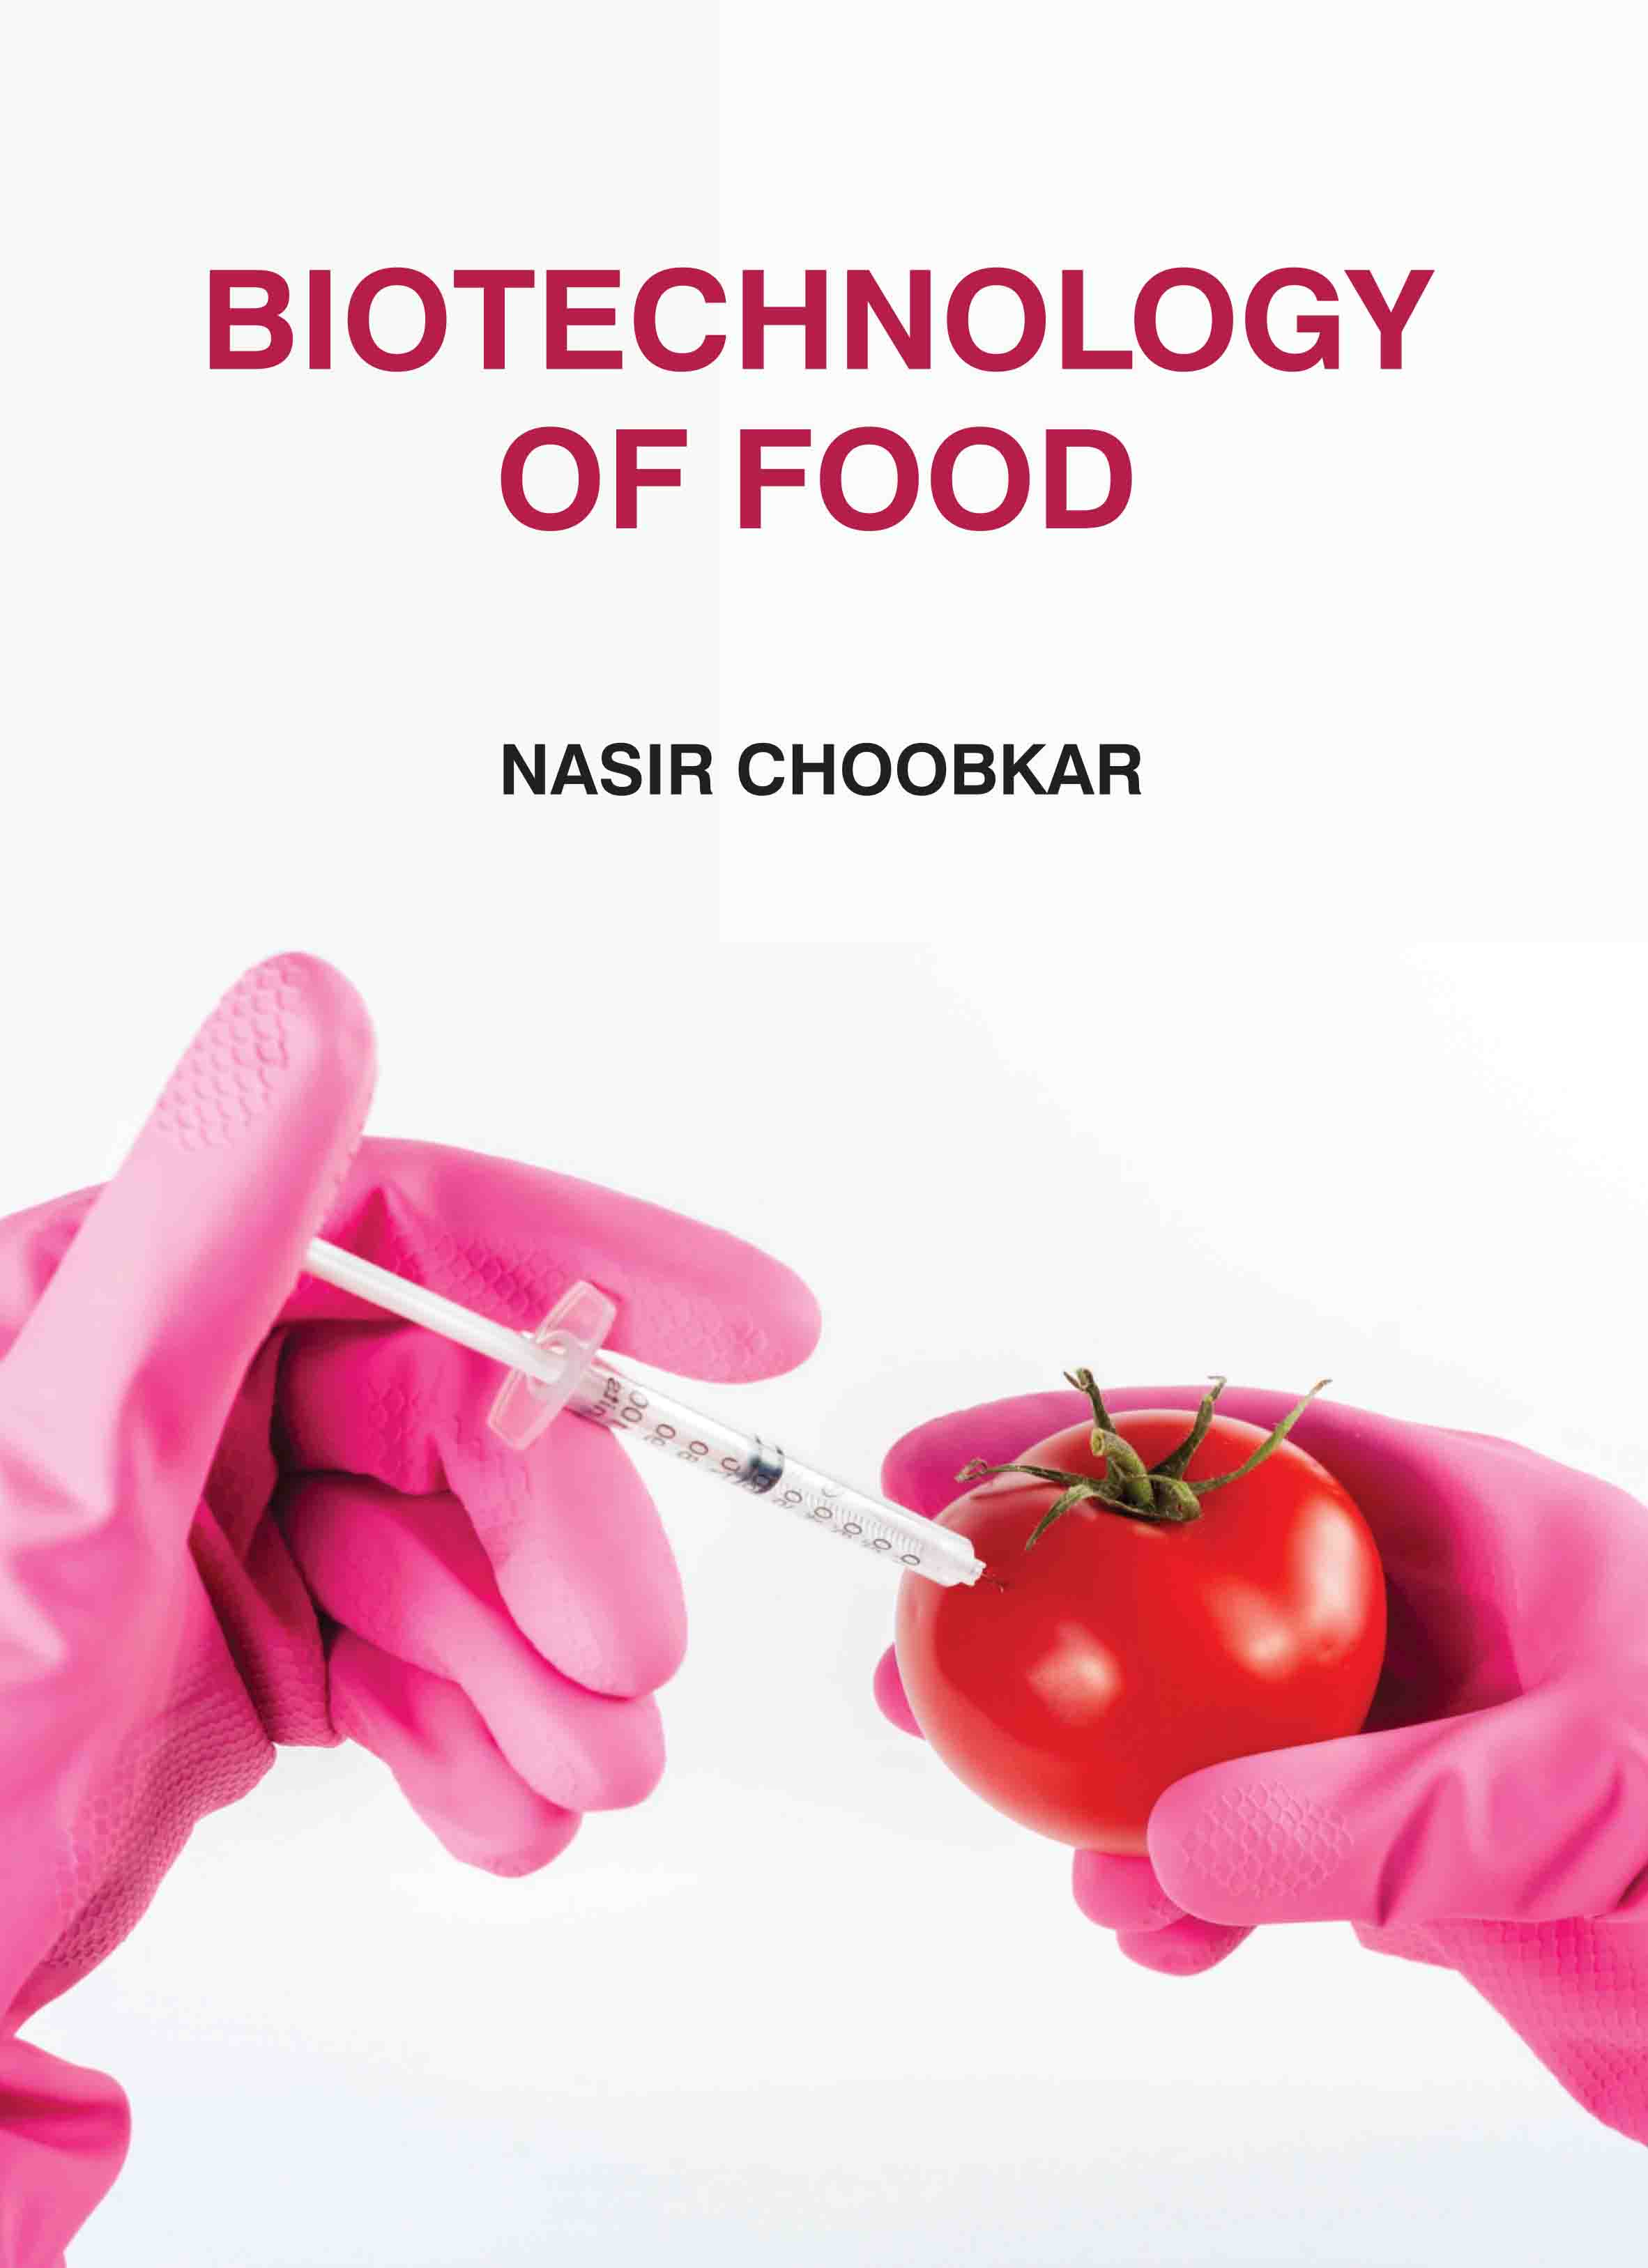 Biotechnology of Food